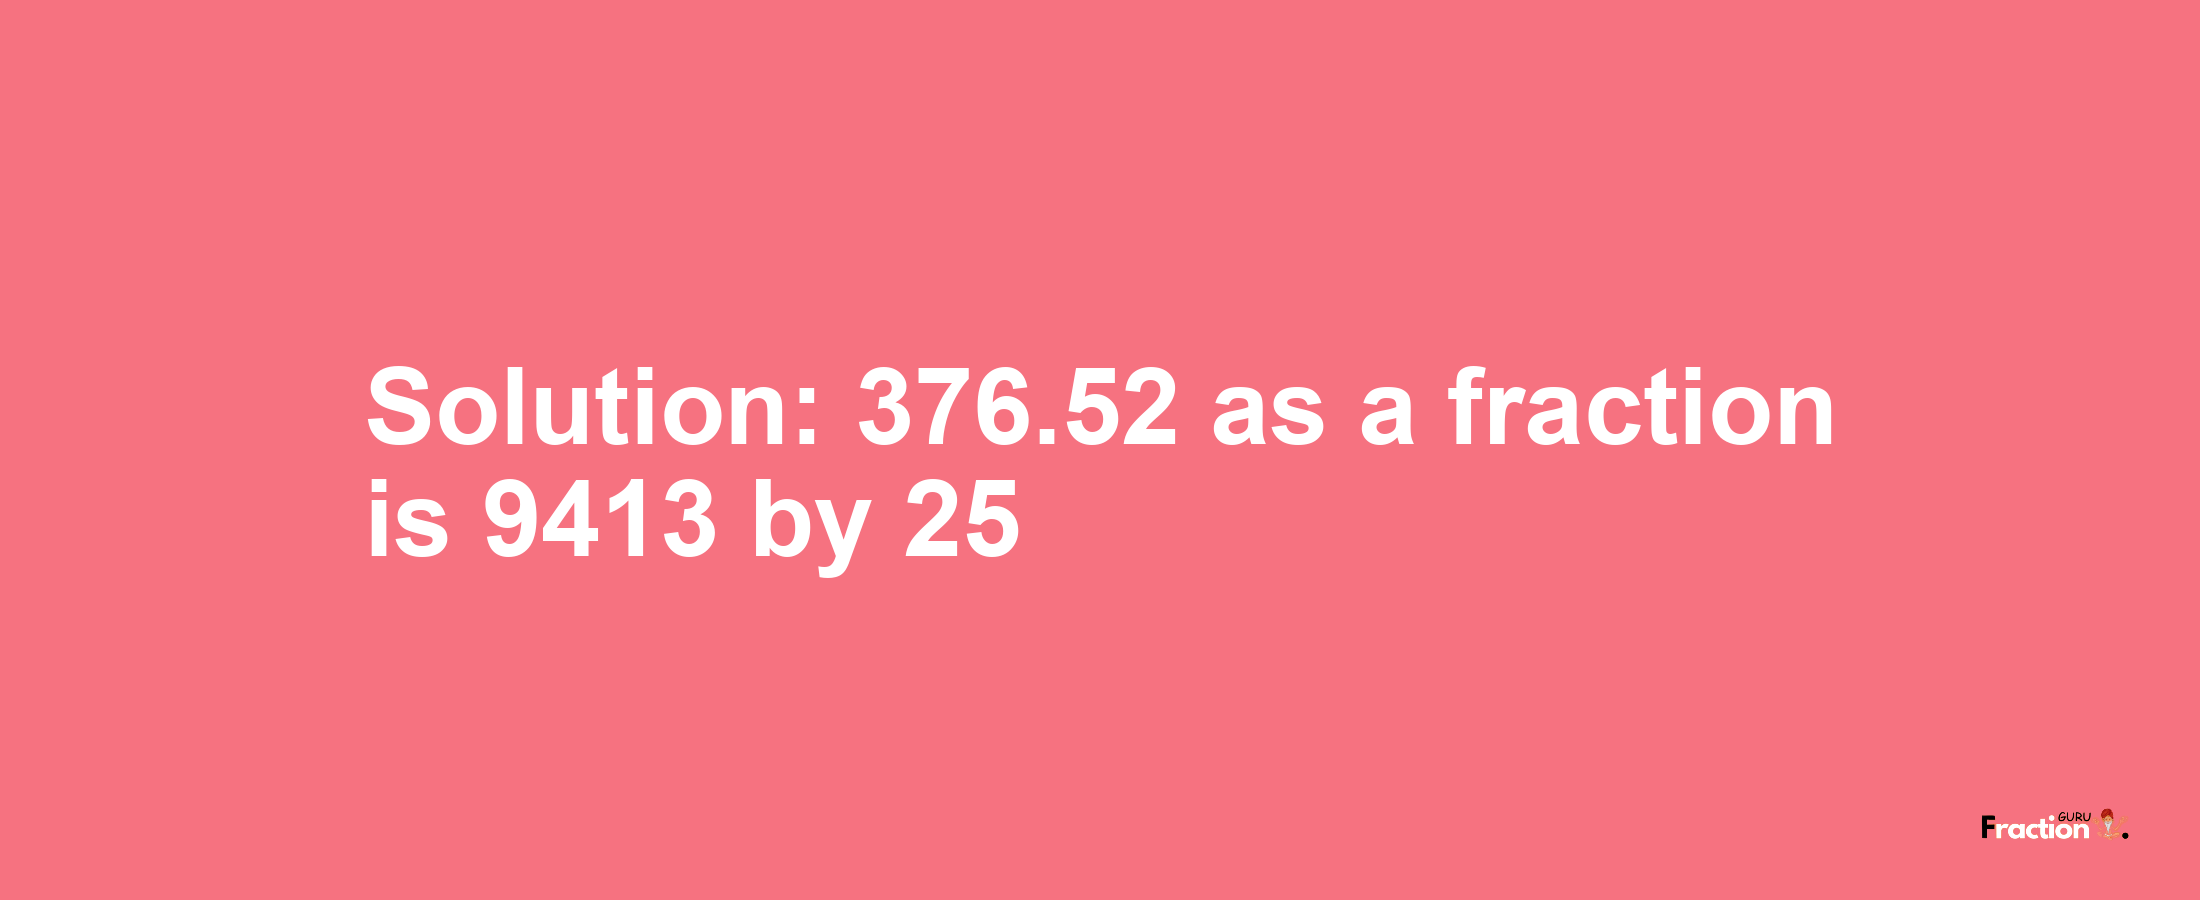 Solution:376.52 as a fraction is 9413/25